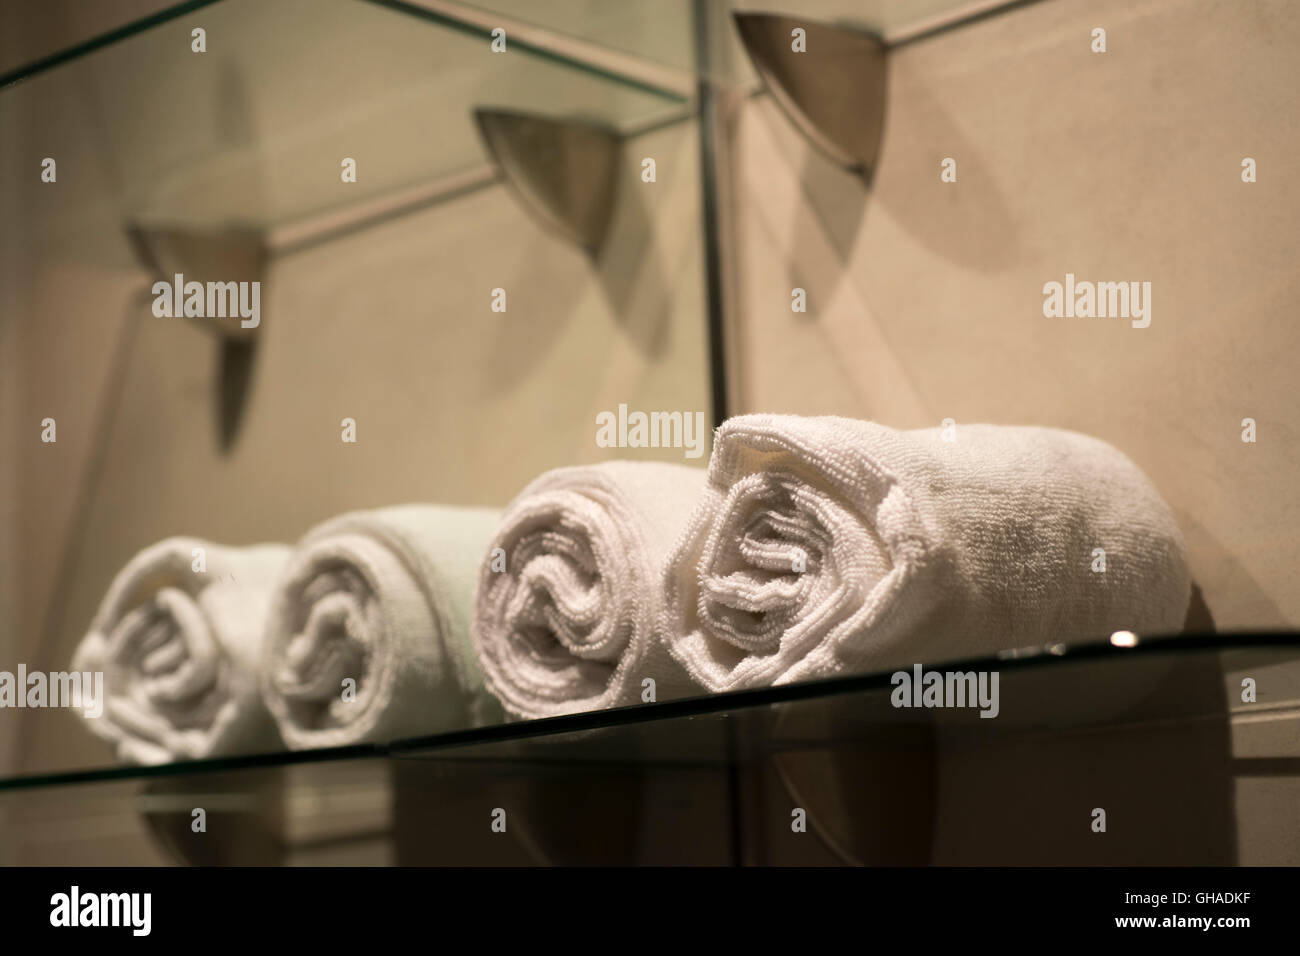 batch towels on glass shelf with mirror reflection Stock Photo